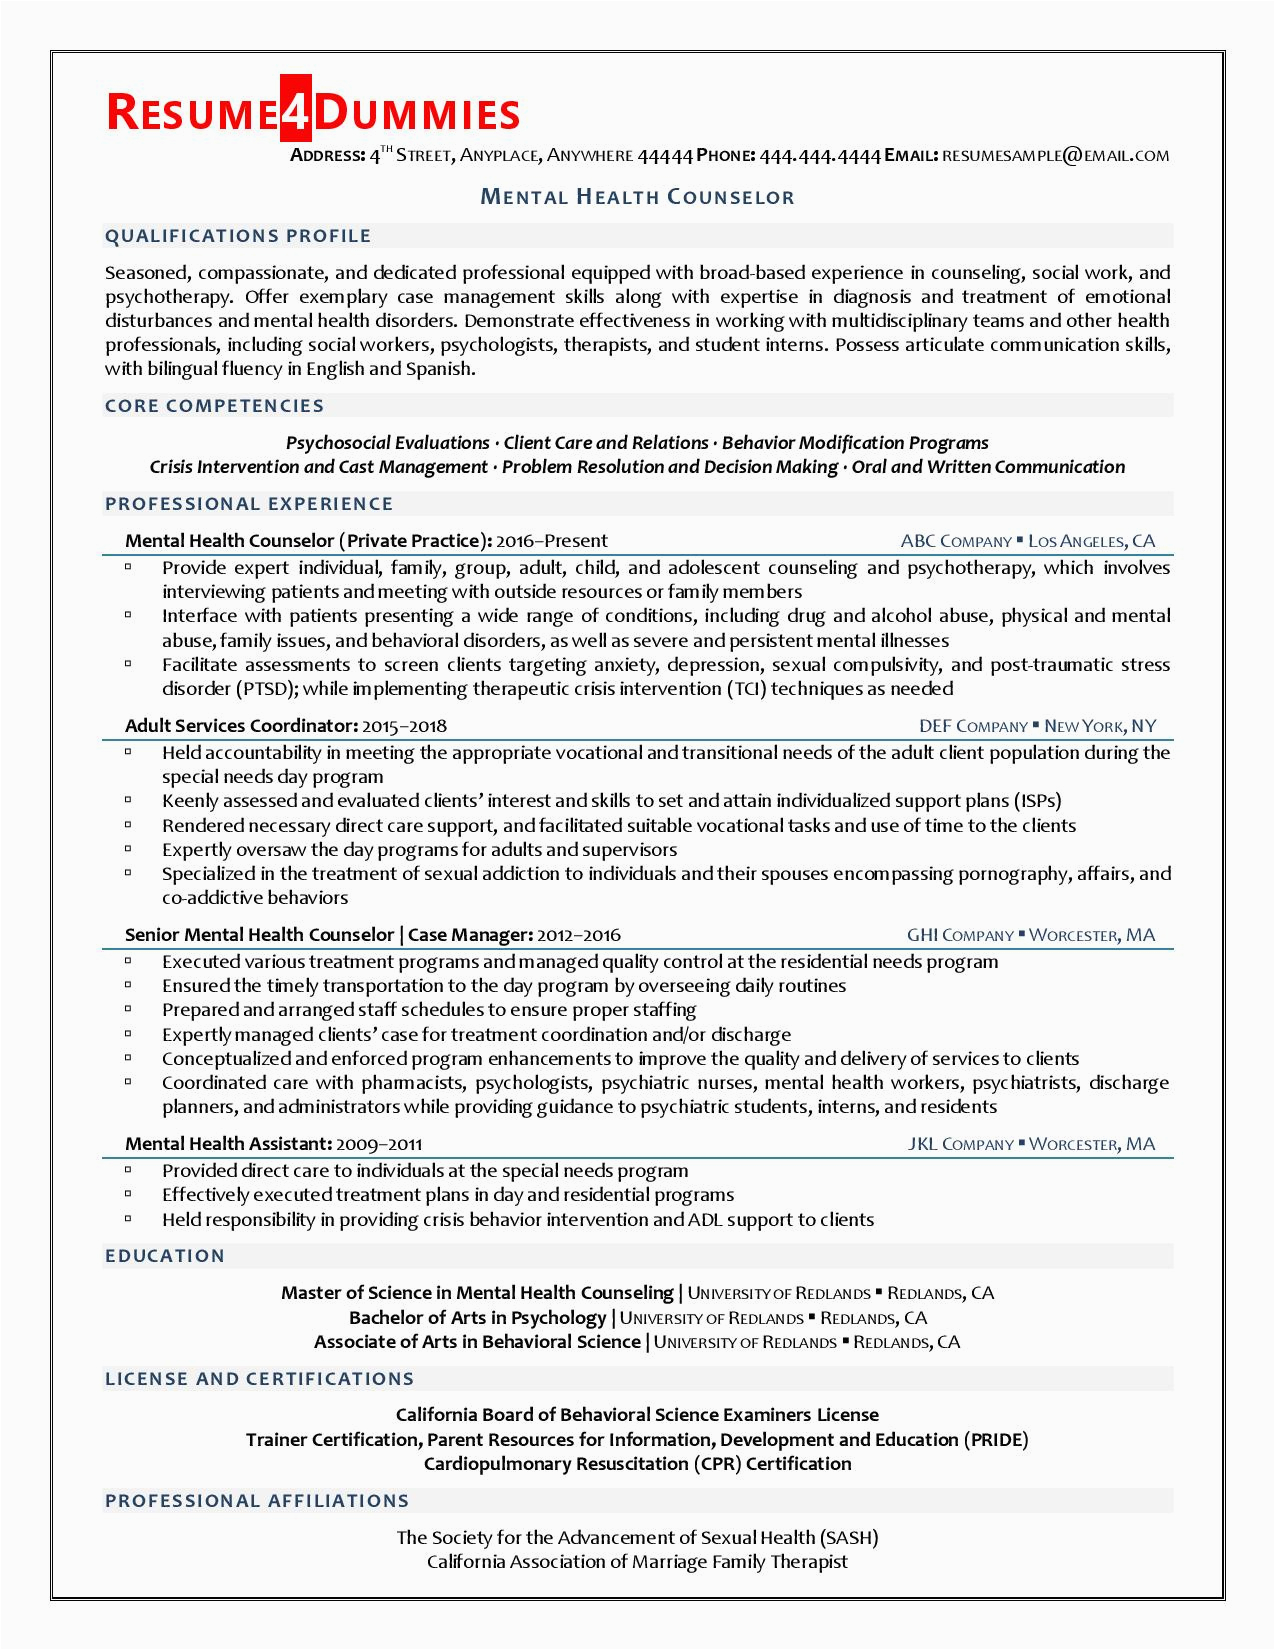 Resume Samples for Mental Health Counselors Mental Health Counselor Resume Example